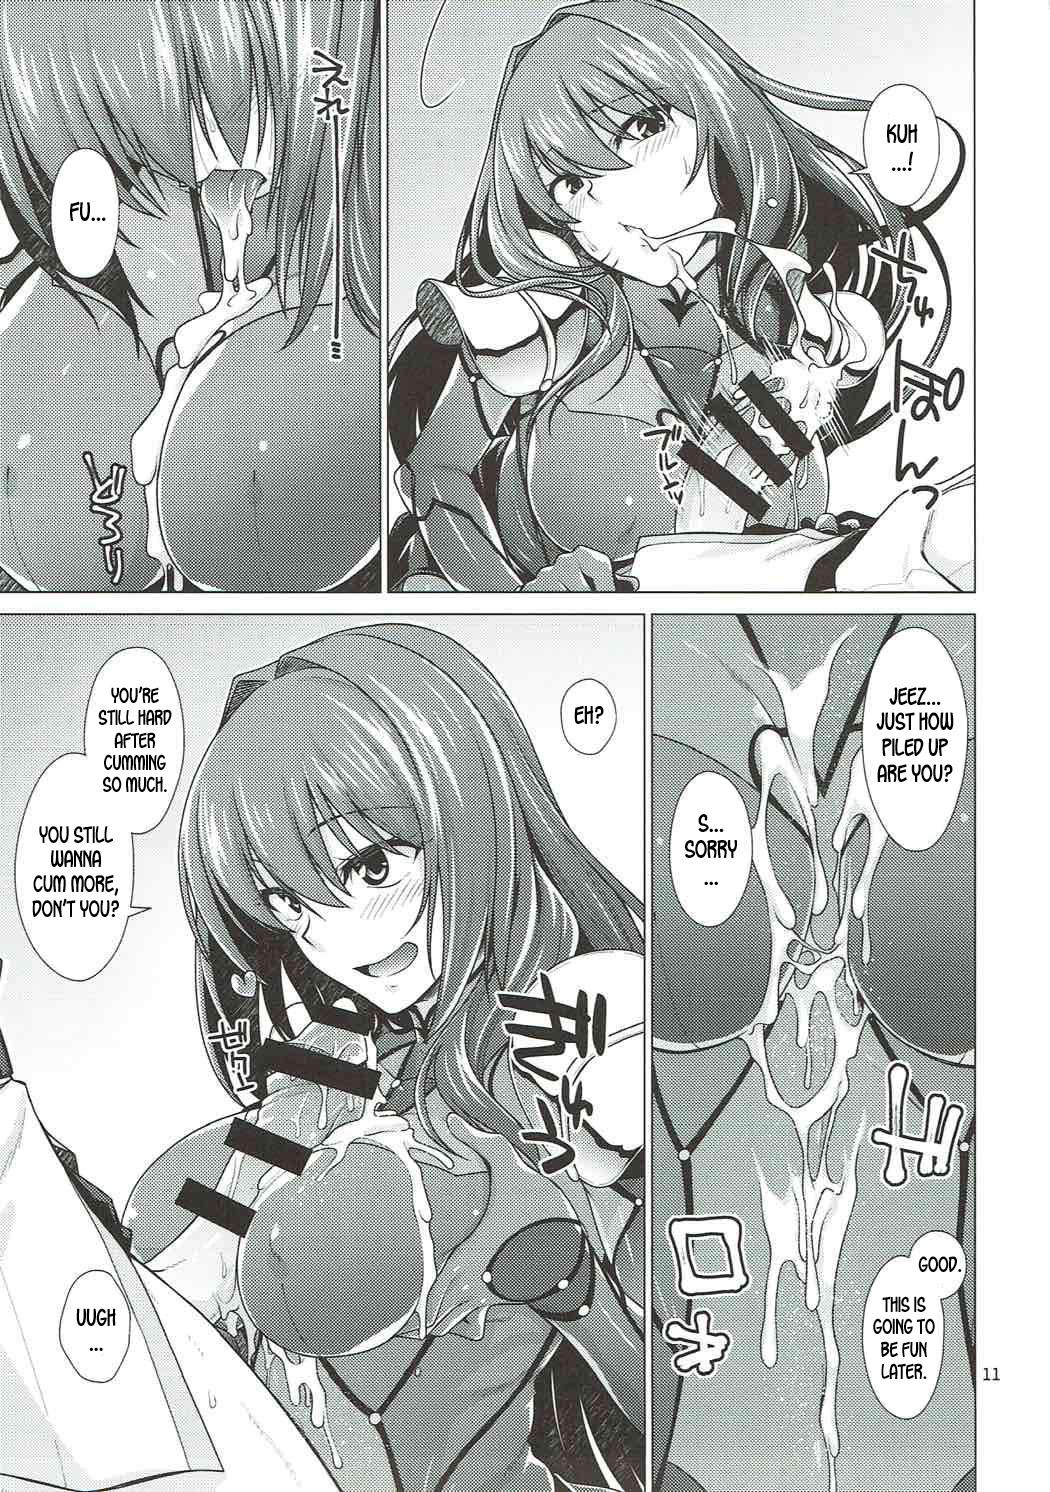 Celebrity Scathach Shishou to Celt Shiki Gachihamex! - Fate grand order Doctor Sex - Page 10